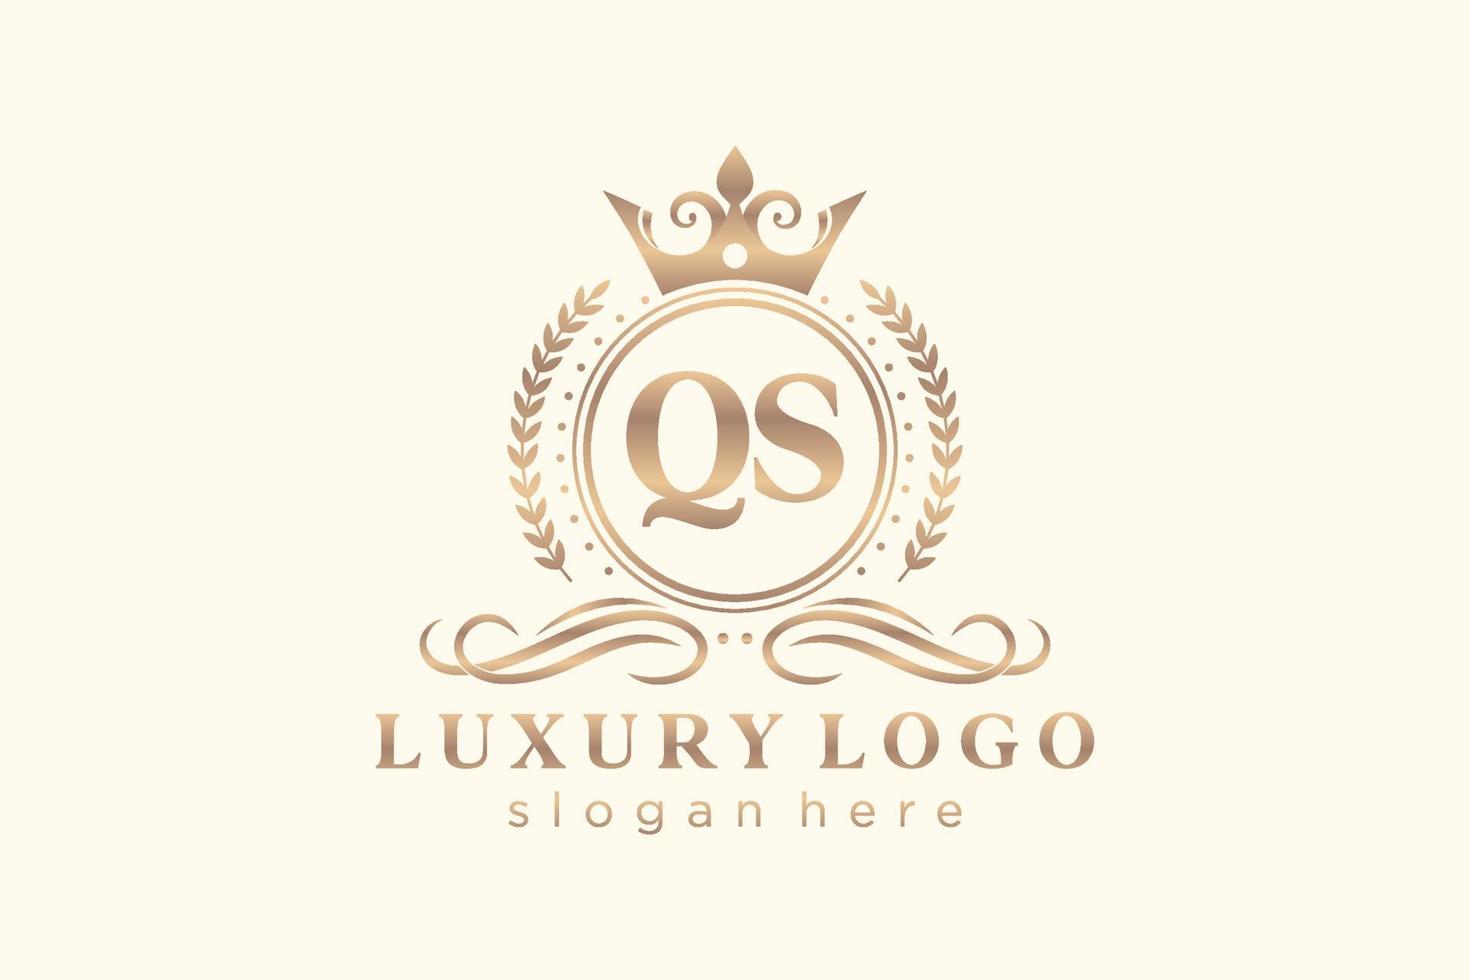 Initial QS Letter Royal Luxury Logo template in vector art for Restaurant, Royalty, Boutique, Cafe, Hotel, Heraldic, Jewelry, Fashion and other vector illustration.